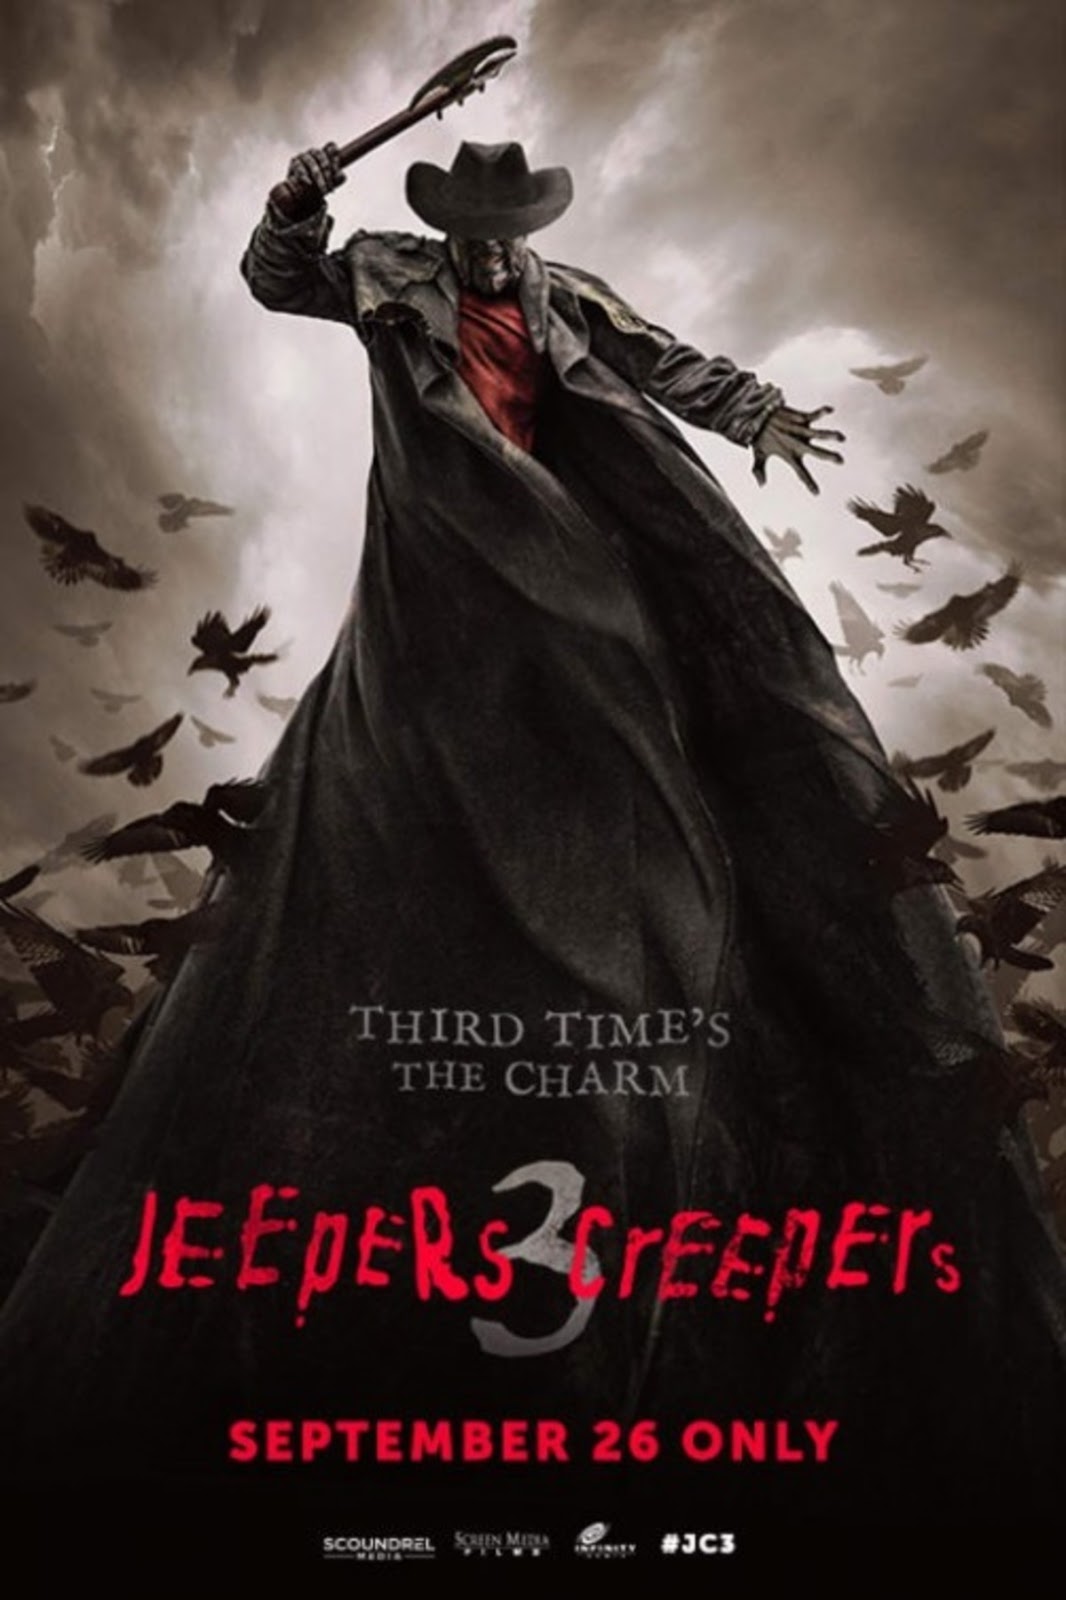 jeepers creepers 3 poster